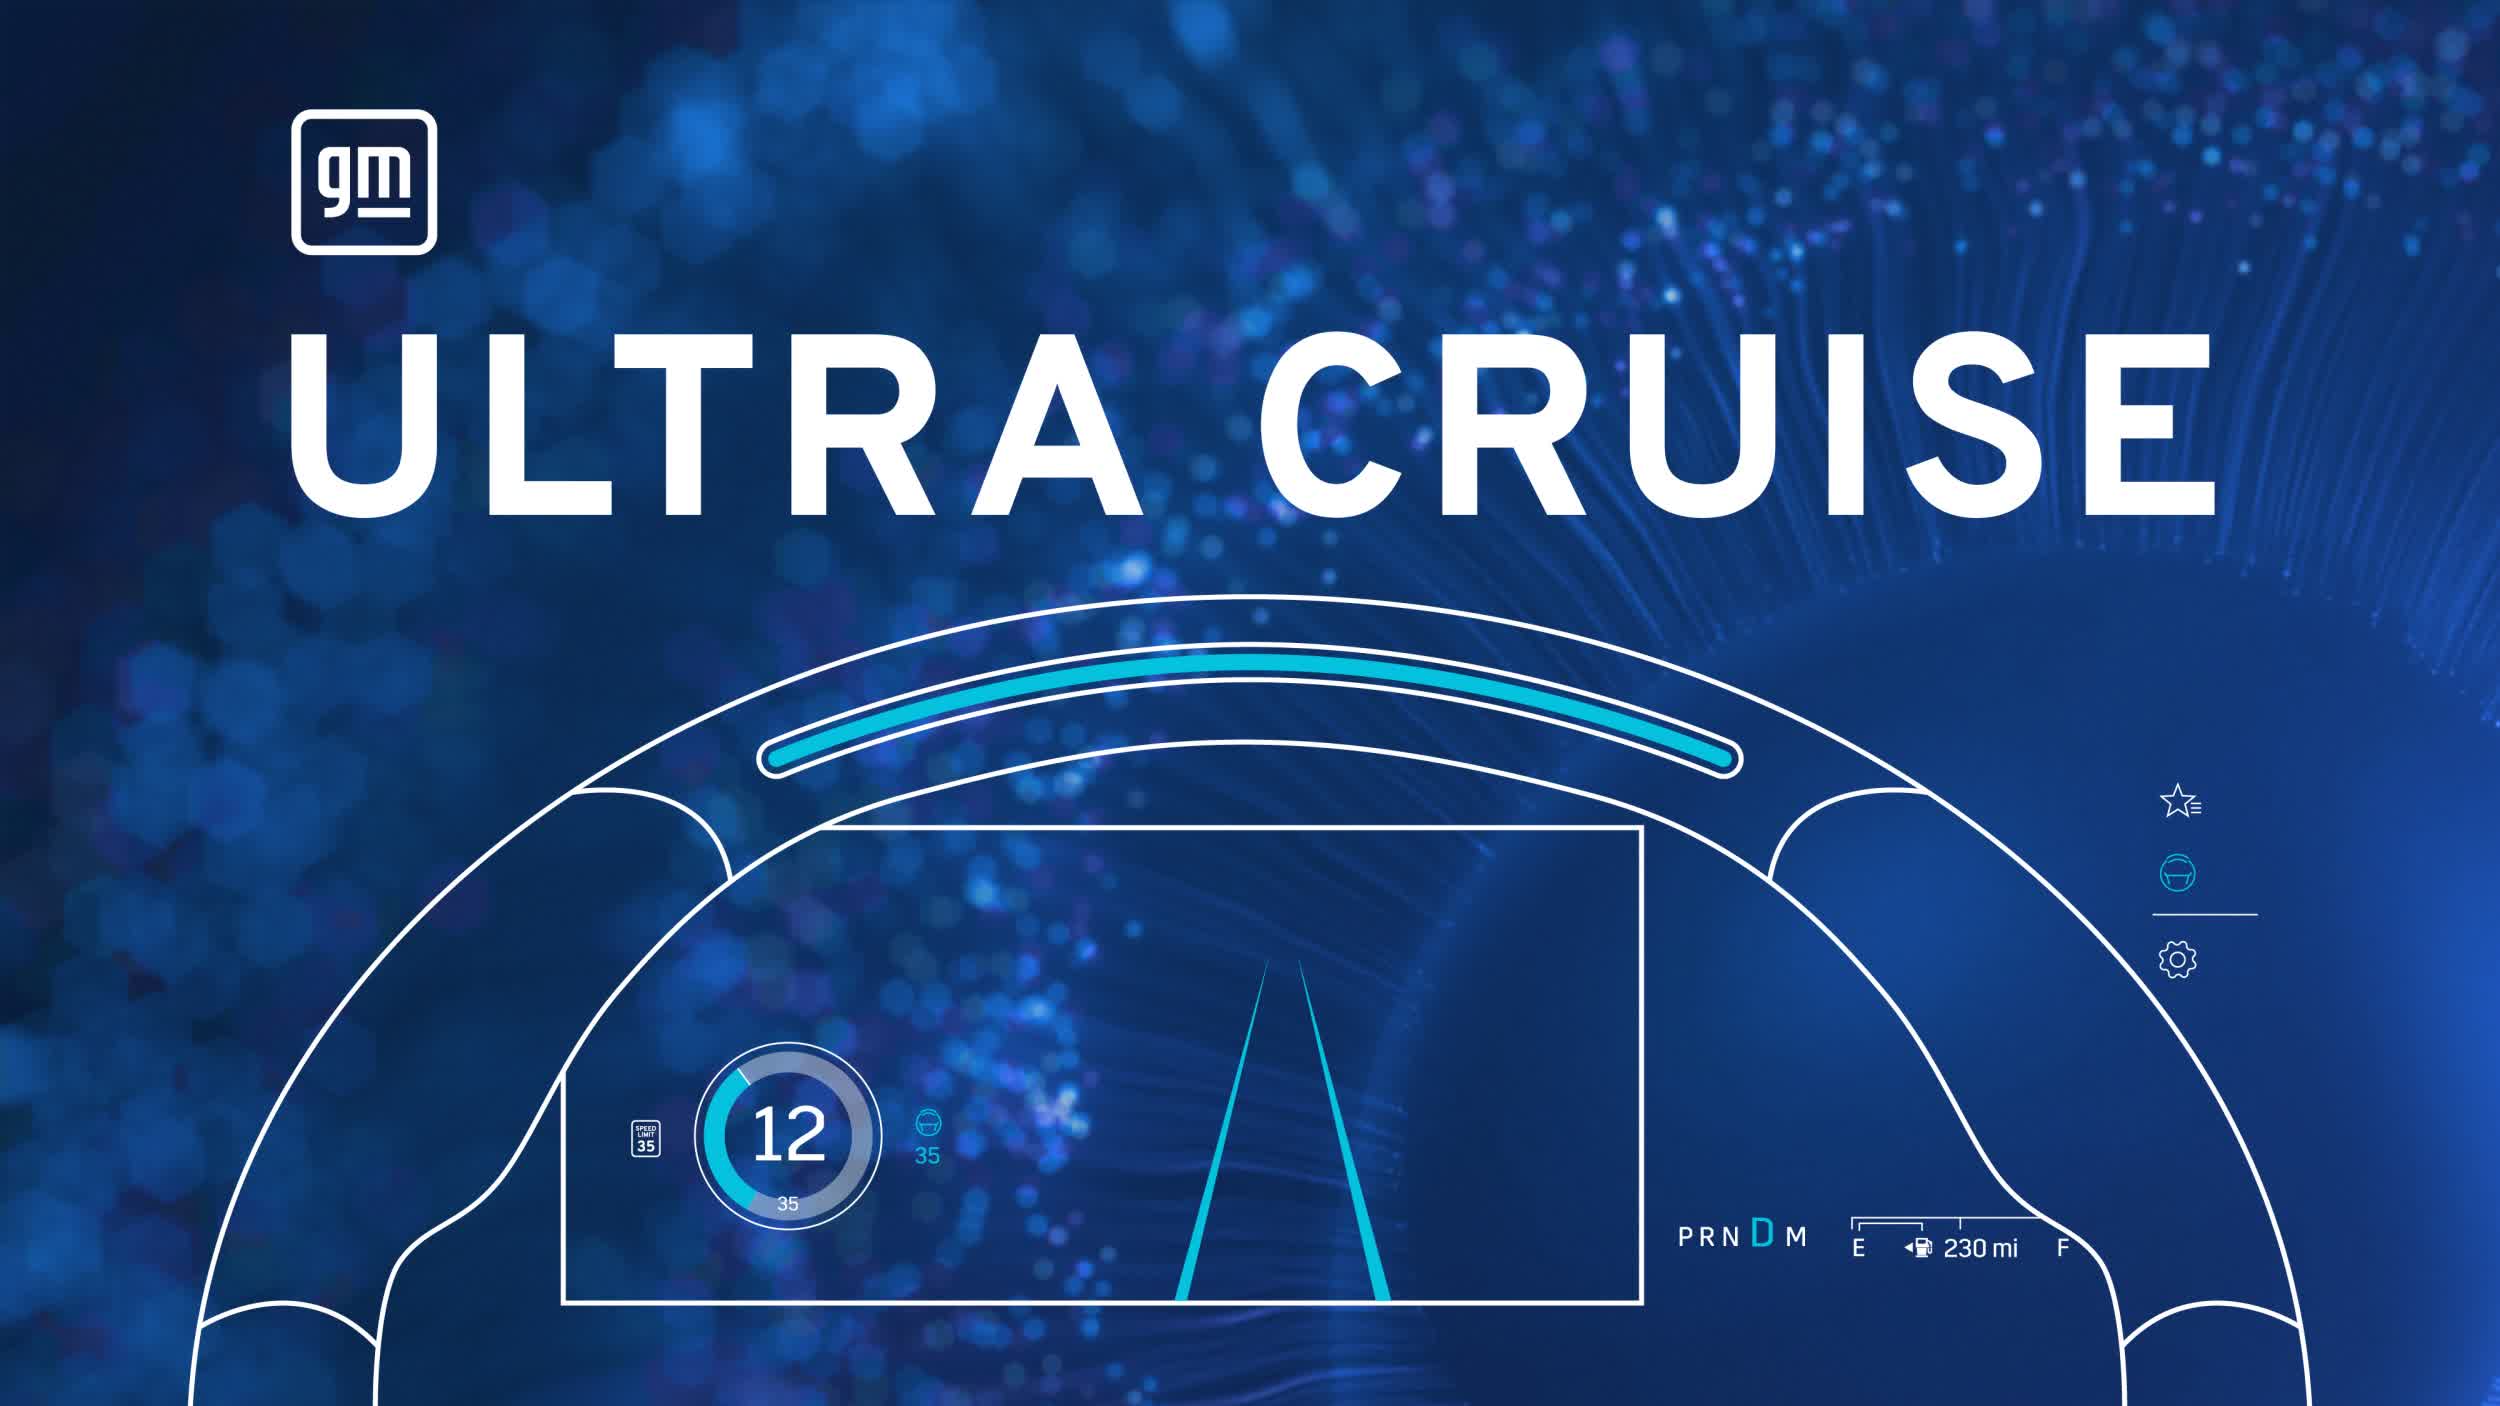 GM unveils Ultra Cruise advanced driver-assistance technology for premium vehicles